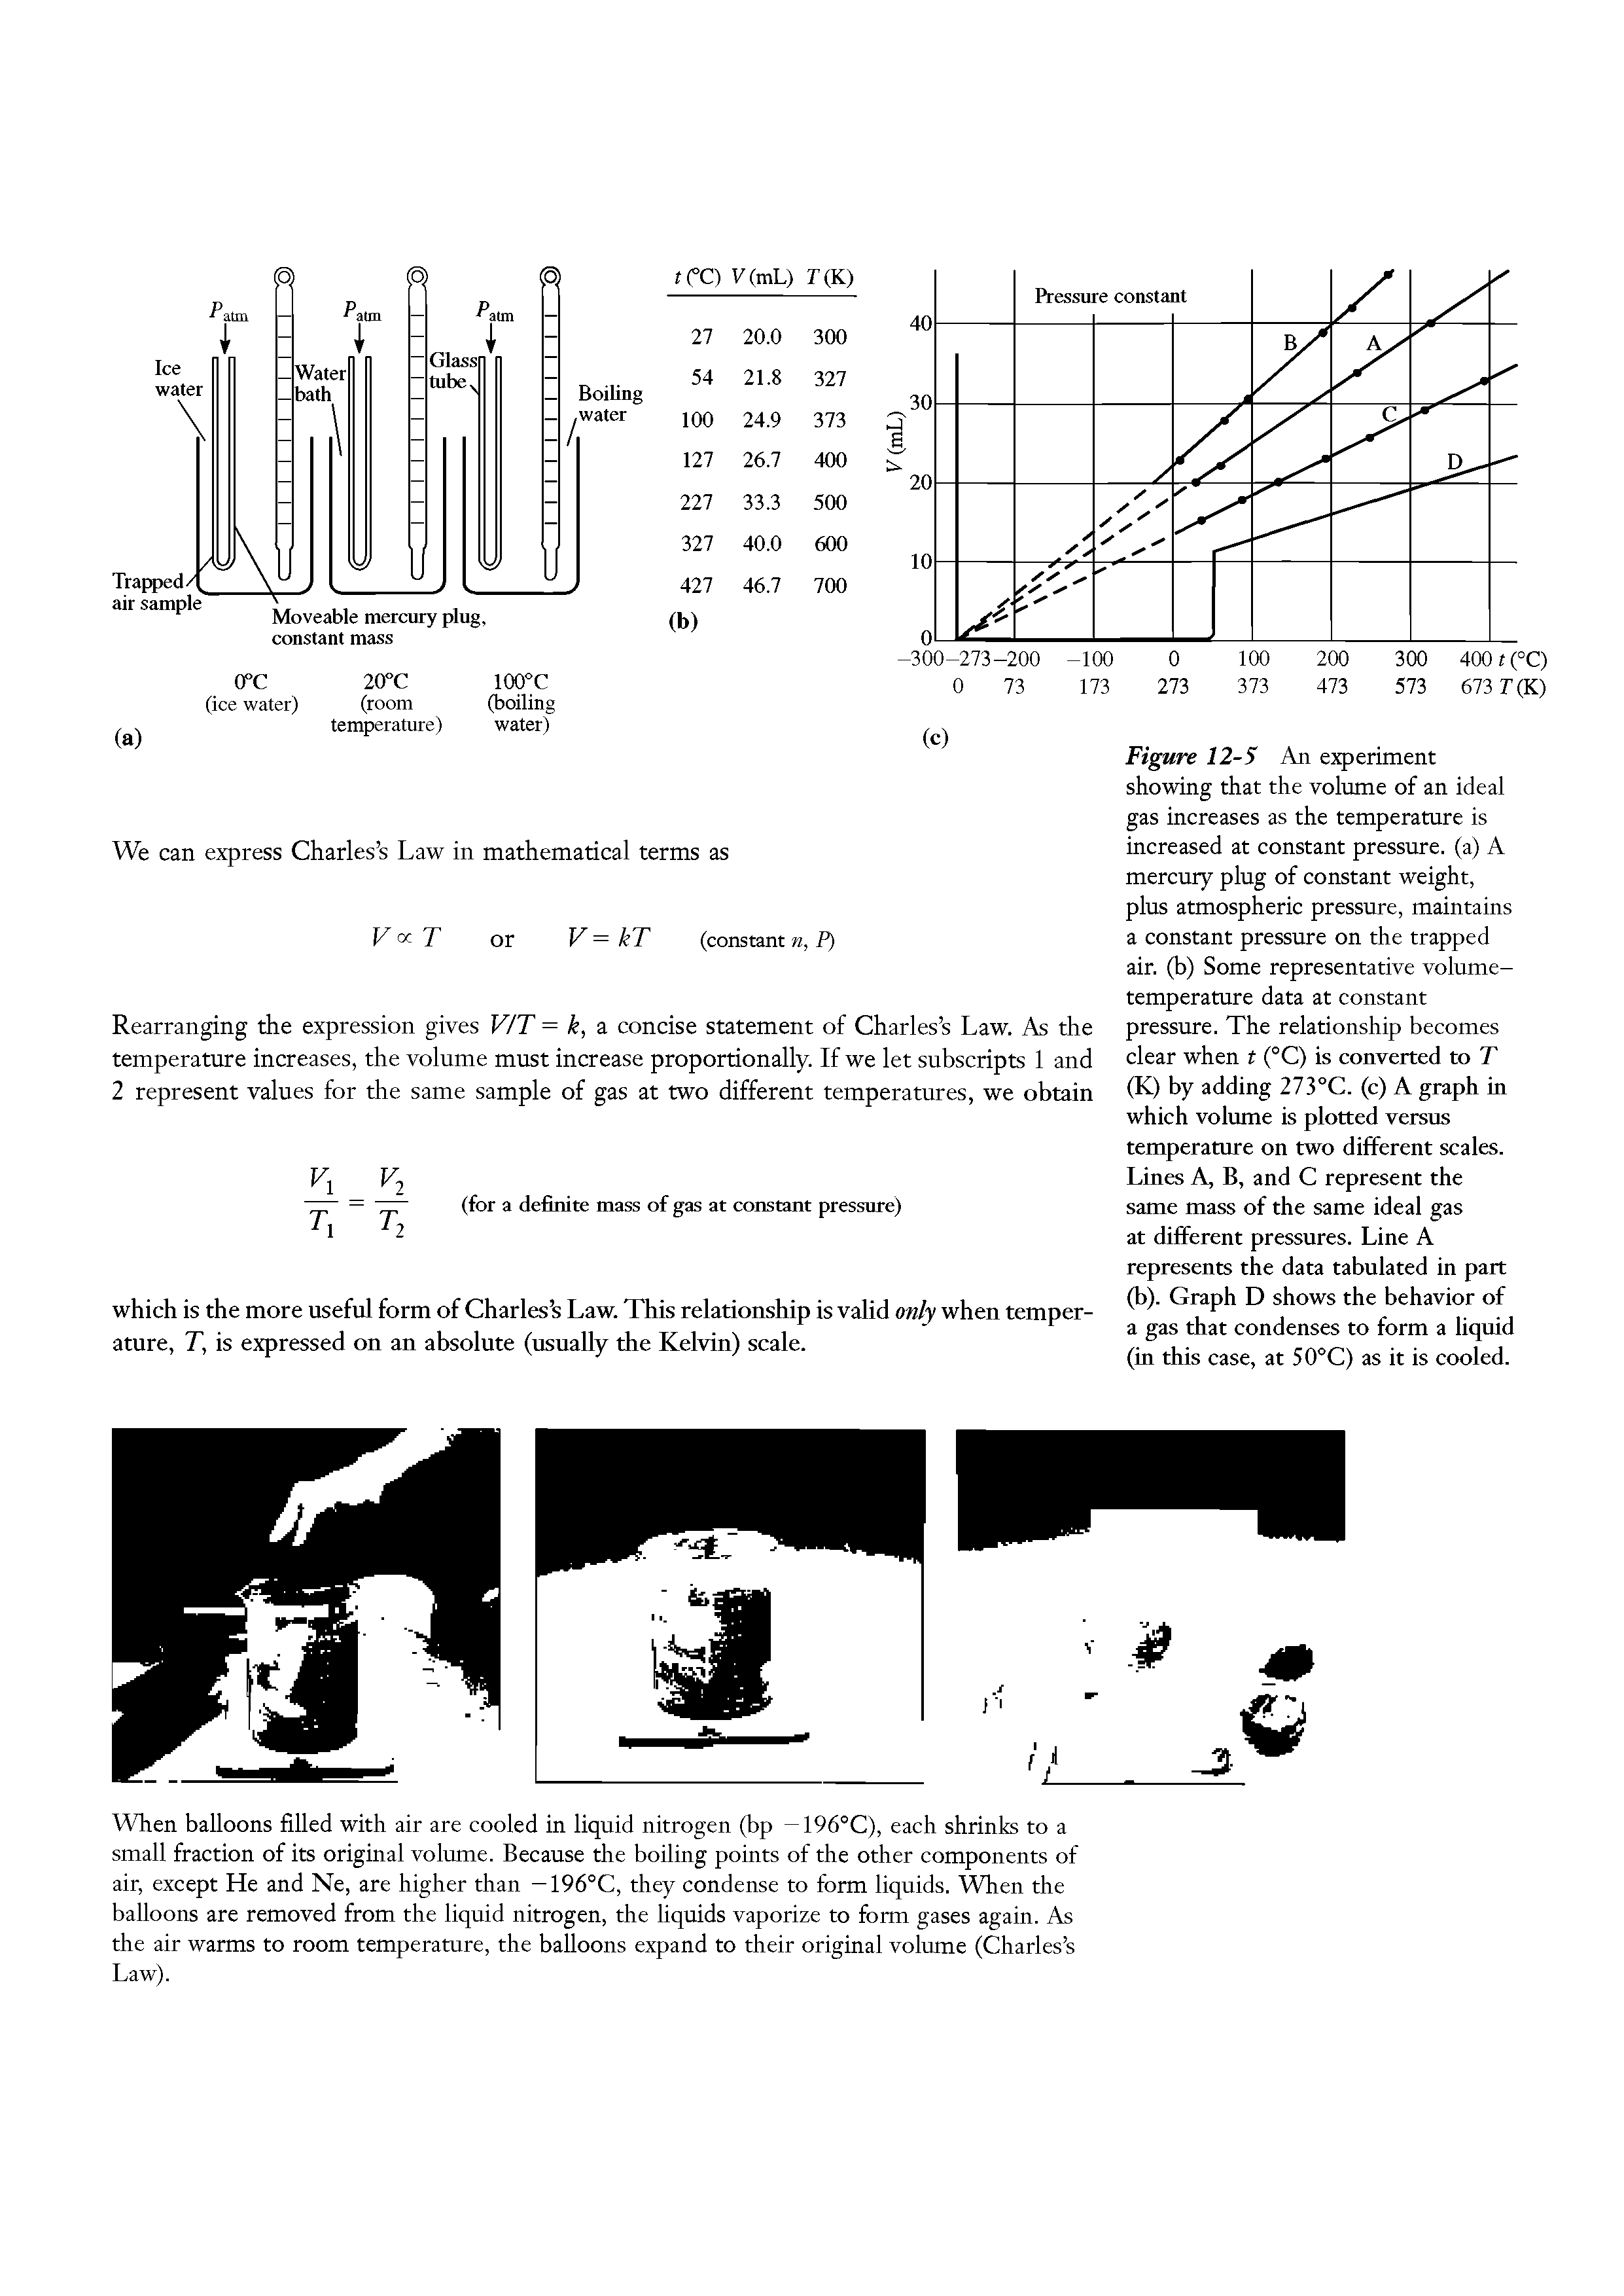 Figure 12-5 An experiment showing that the volume of an ideal gas increases as the temperature is increased at constant pressure, (a) A mercury plug of constant weight, plus atmospheric pressure, maintains a constant pressure on the trapped air. (b) Some representative volume-temperature data at constant pressure. The relationship becomes clear when t (°C) is converted to T (K) by adding 273°C. (c) A graph in which volume is plotted versus temperature on two different scales. Lines A, B, and C represent the same mass of the same ideal gas at different pressures. Line A represents the data tabulated in part (b). Graph D shows the behavior of a gas that condenses to form a liquid (in this case, at 50°C) as it is cooled.